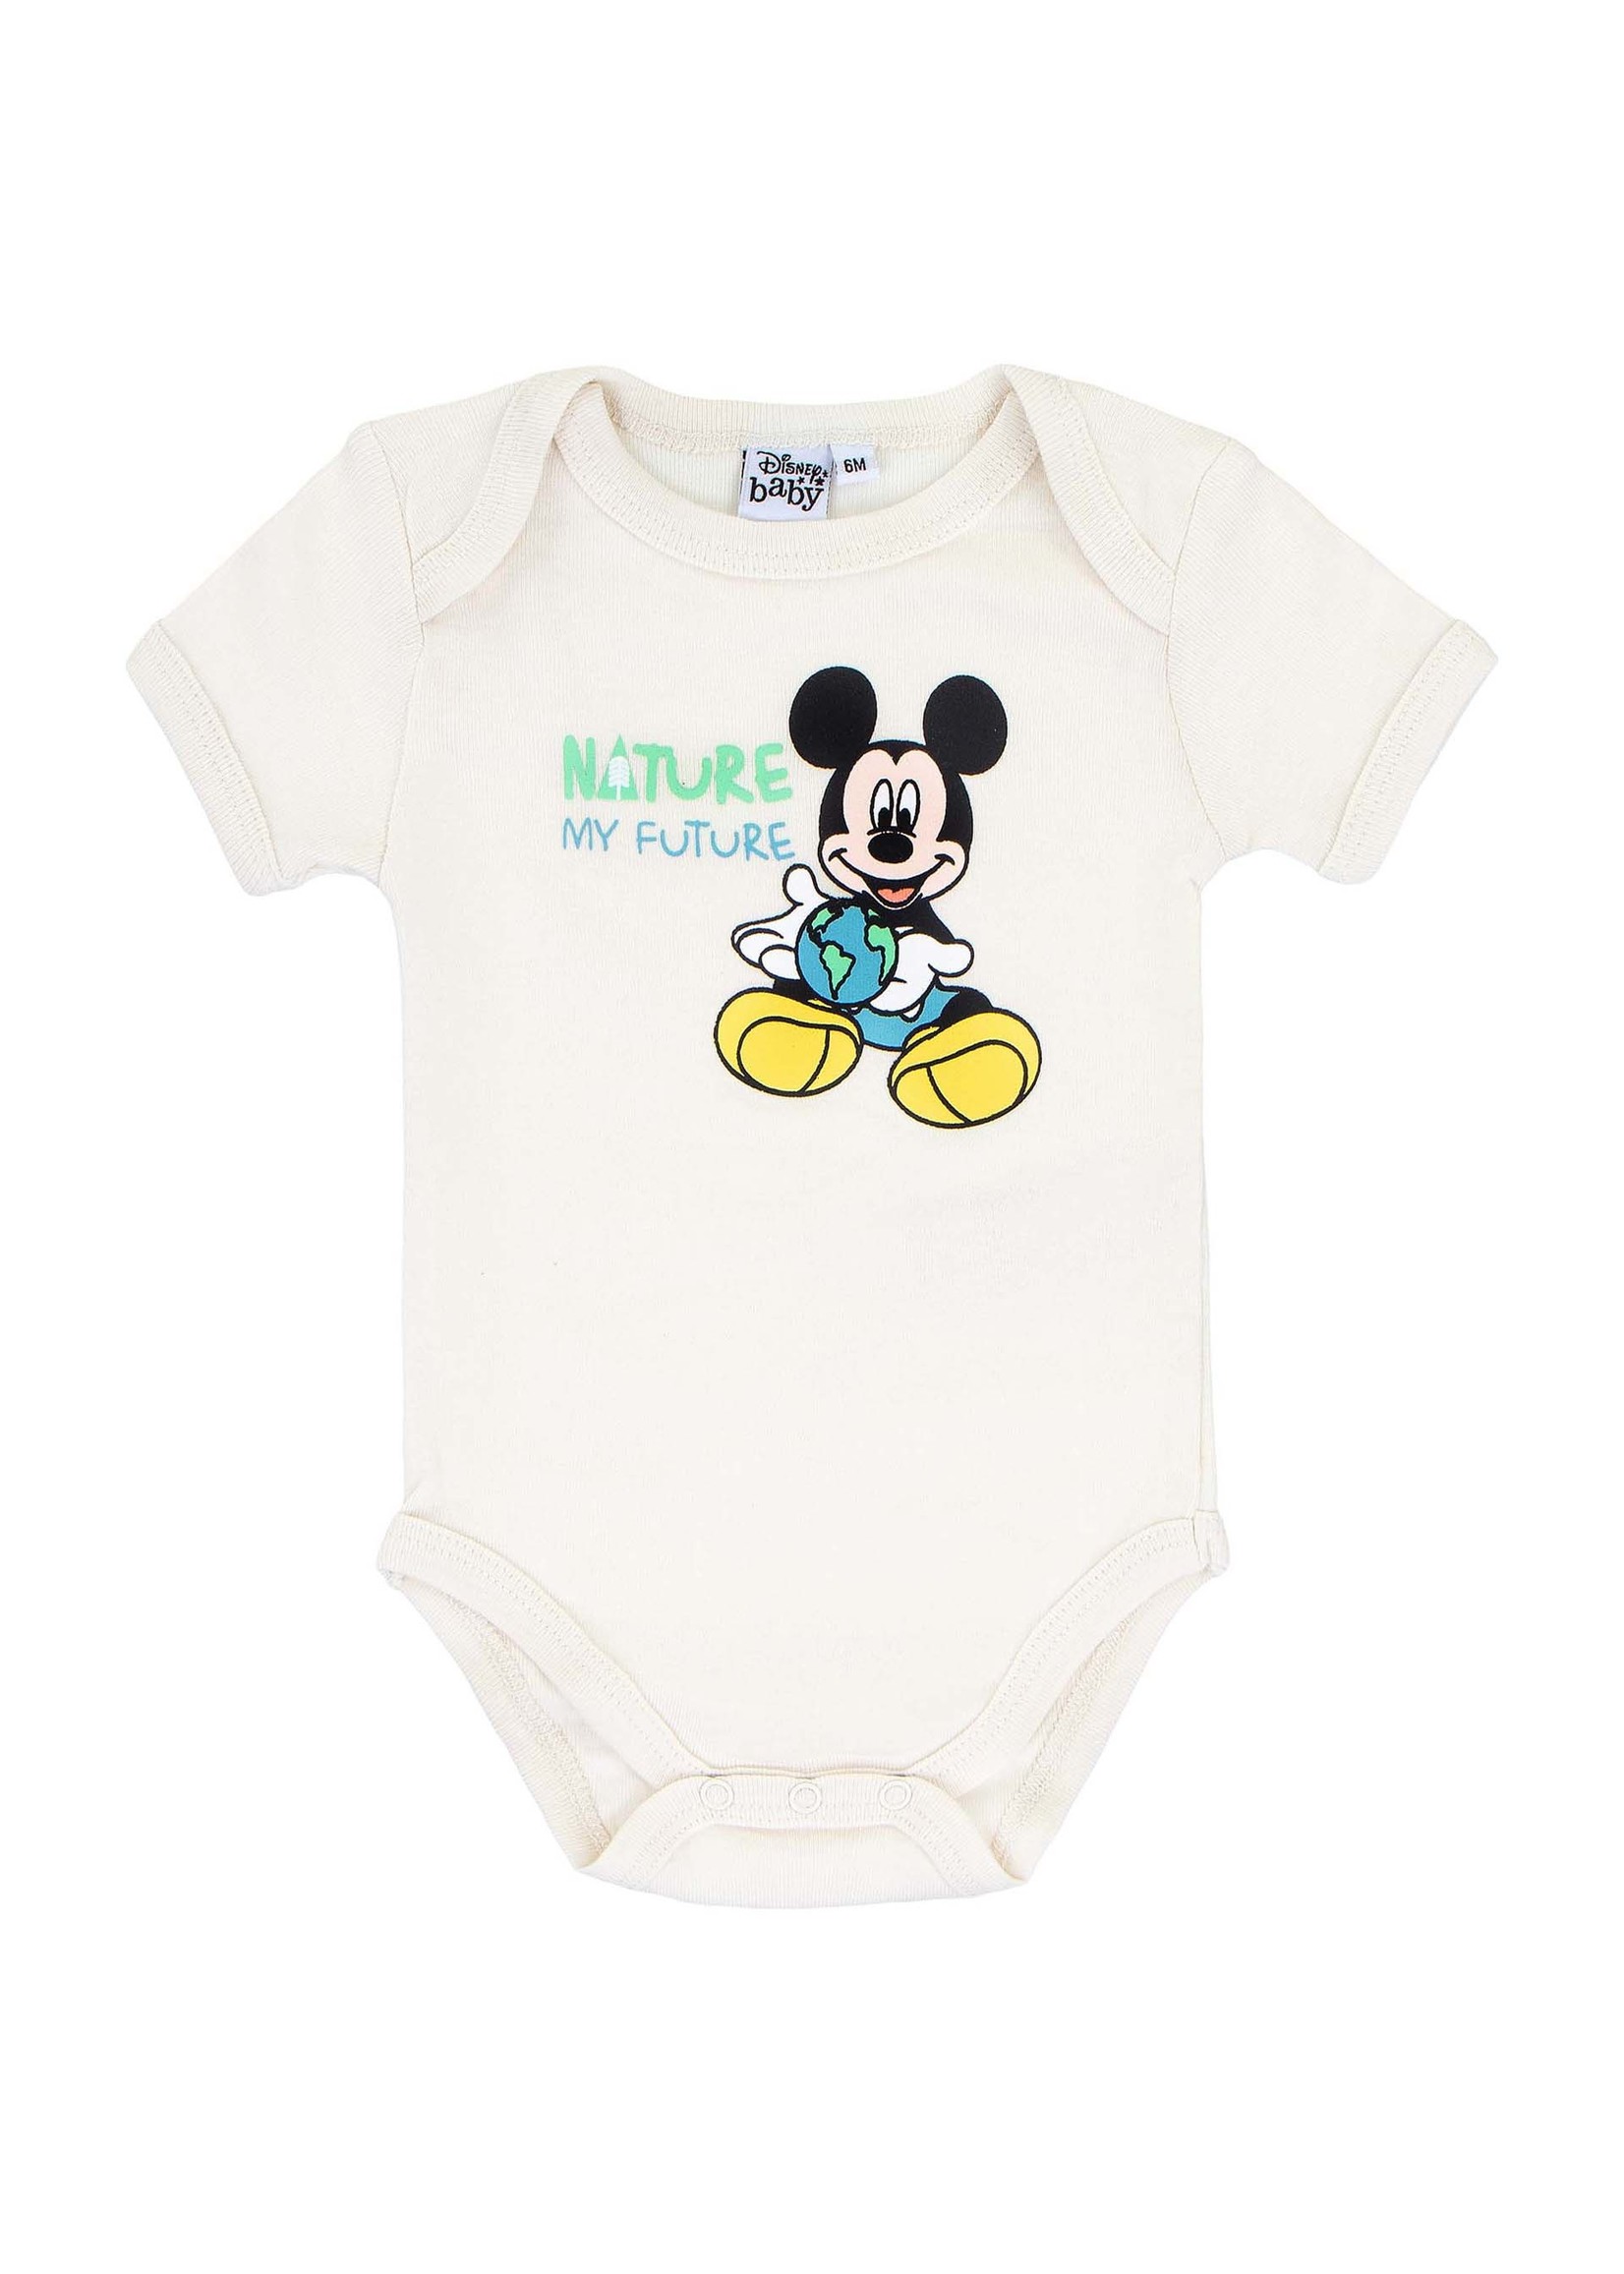 Disney baby Mickey Mouse organic rompers from Disney baby 2 pack